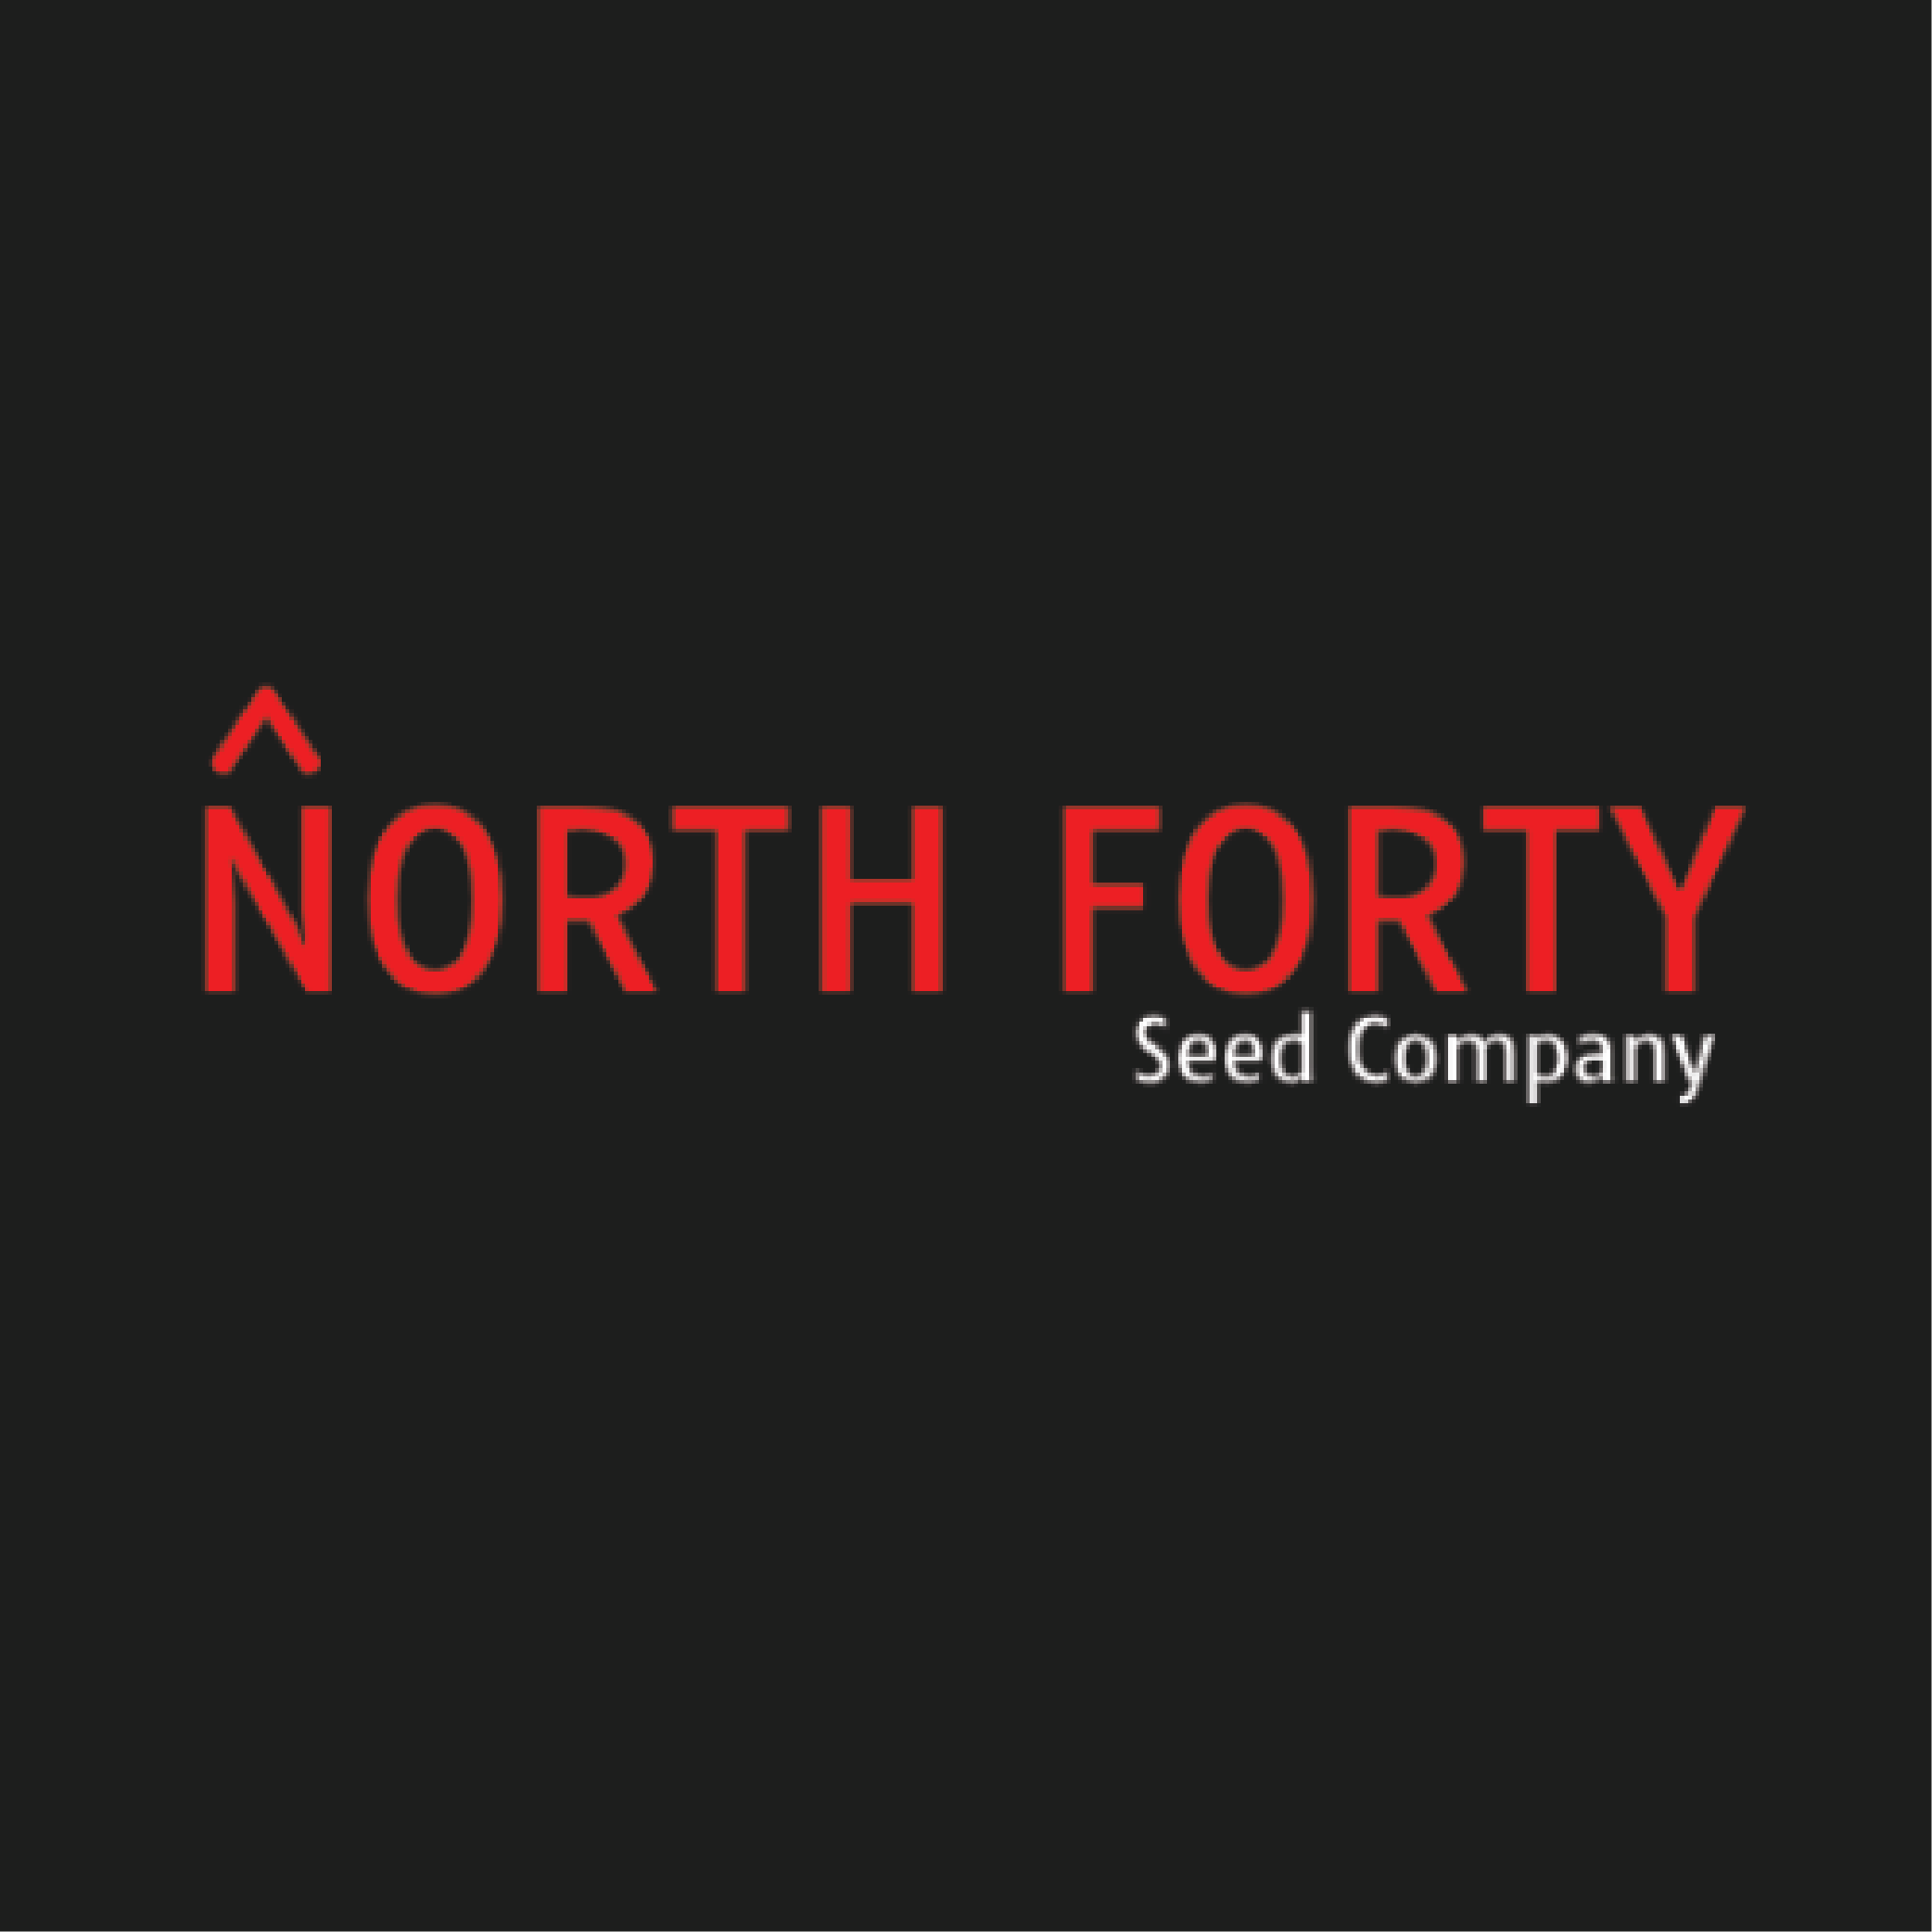 North Forty